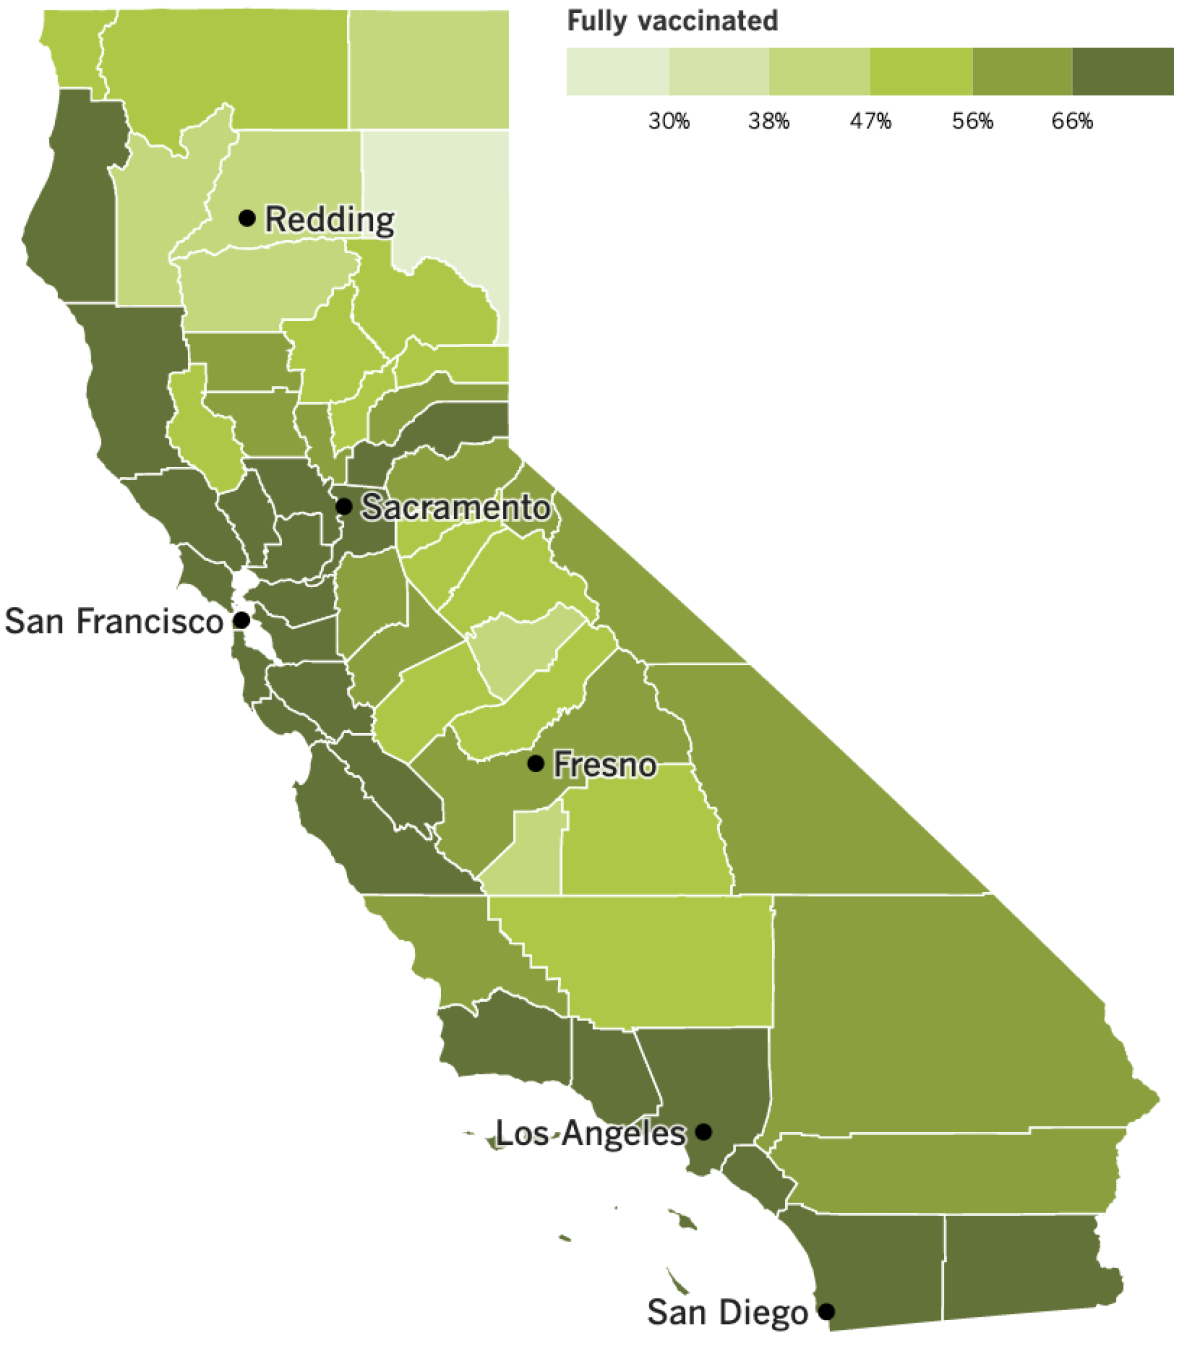 A map showing California's COVID-19 vaccination progress by county, as of May 10, 2022.